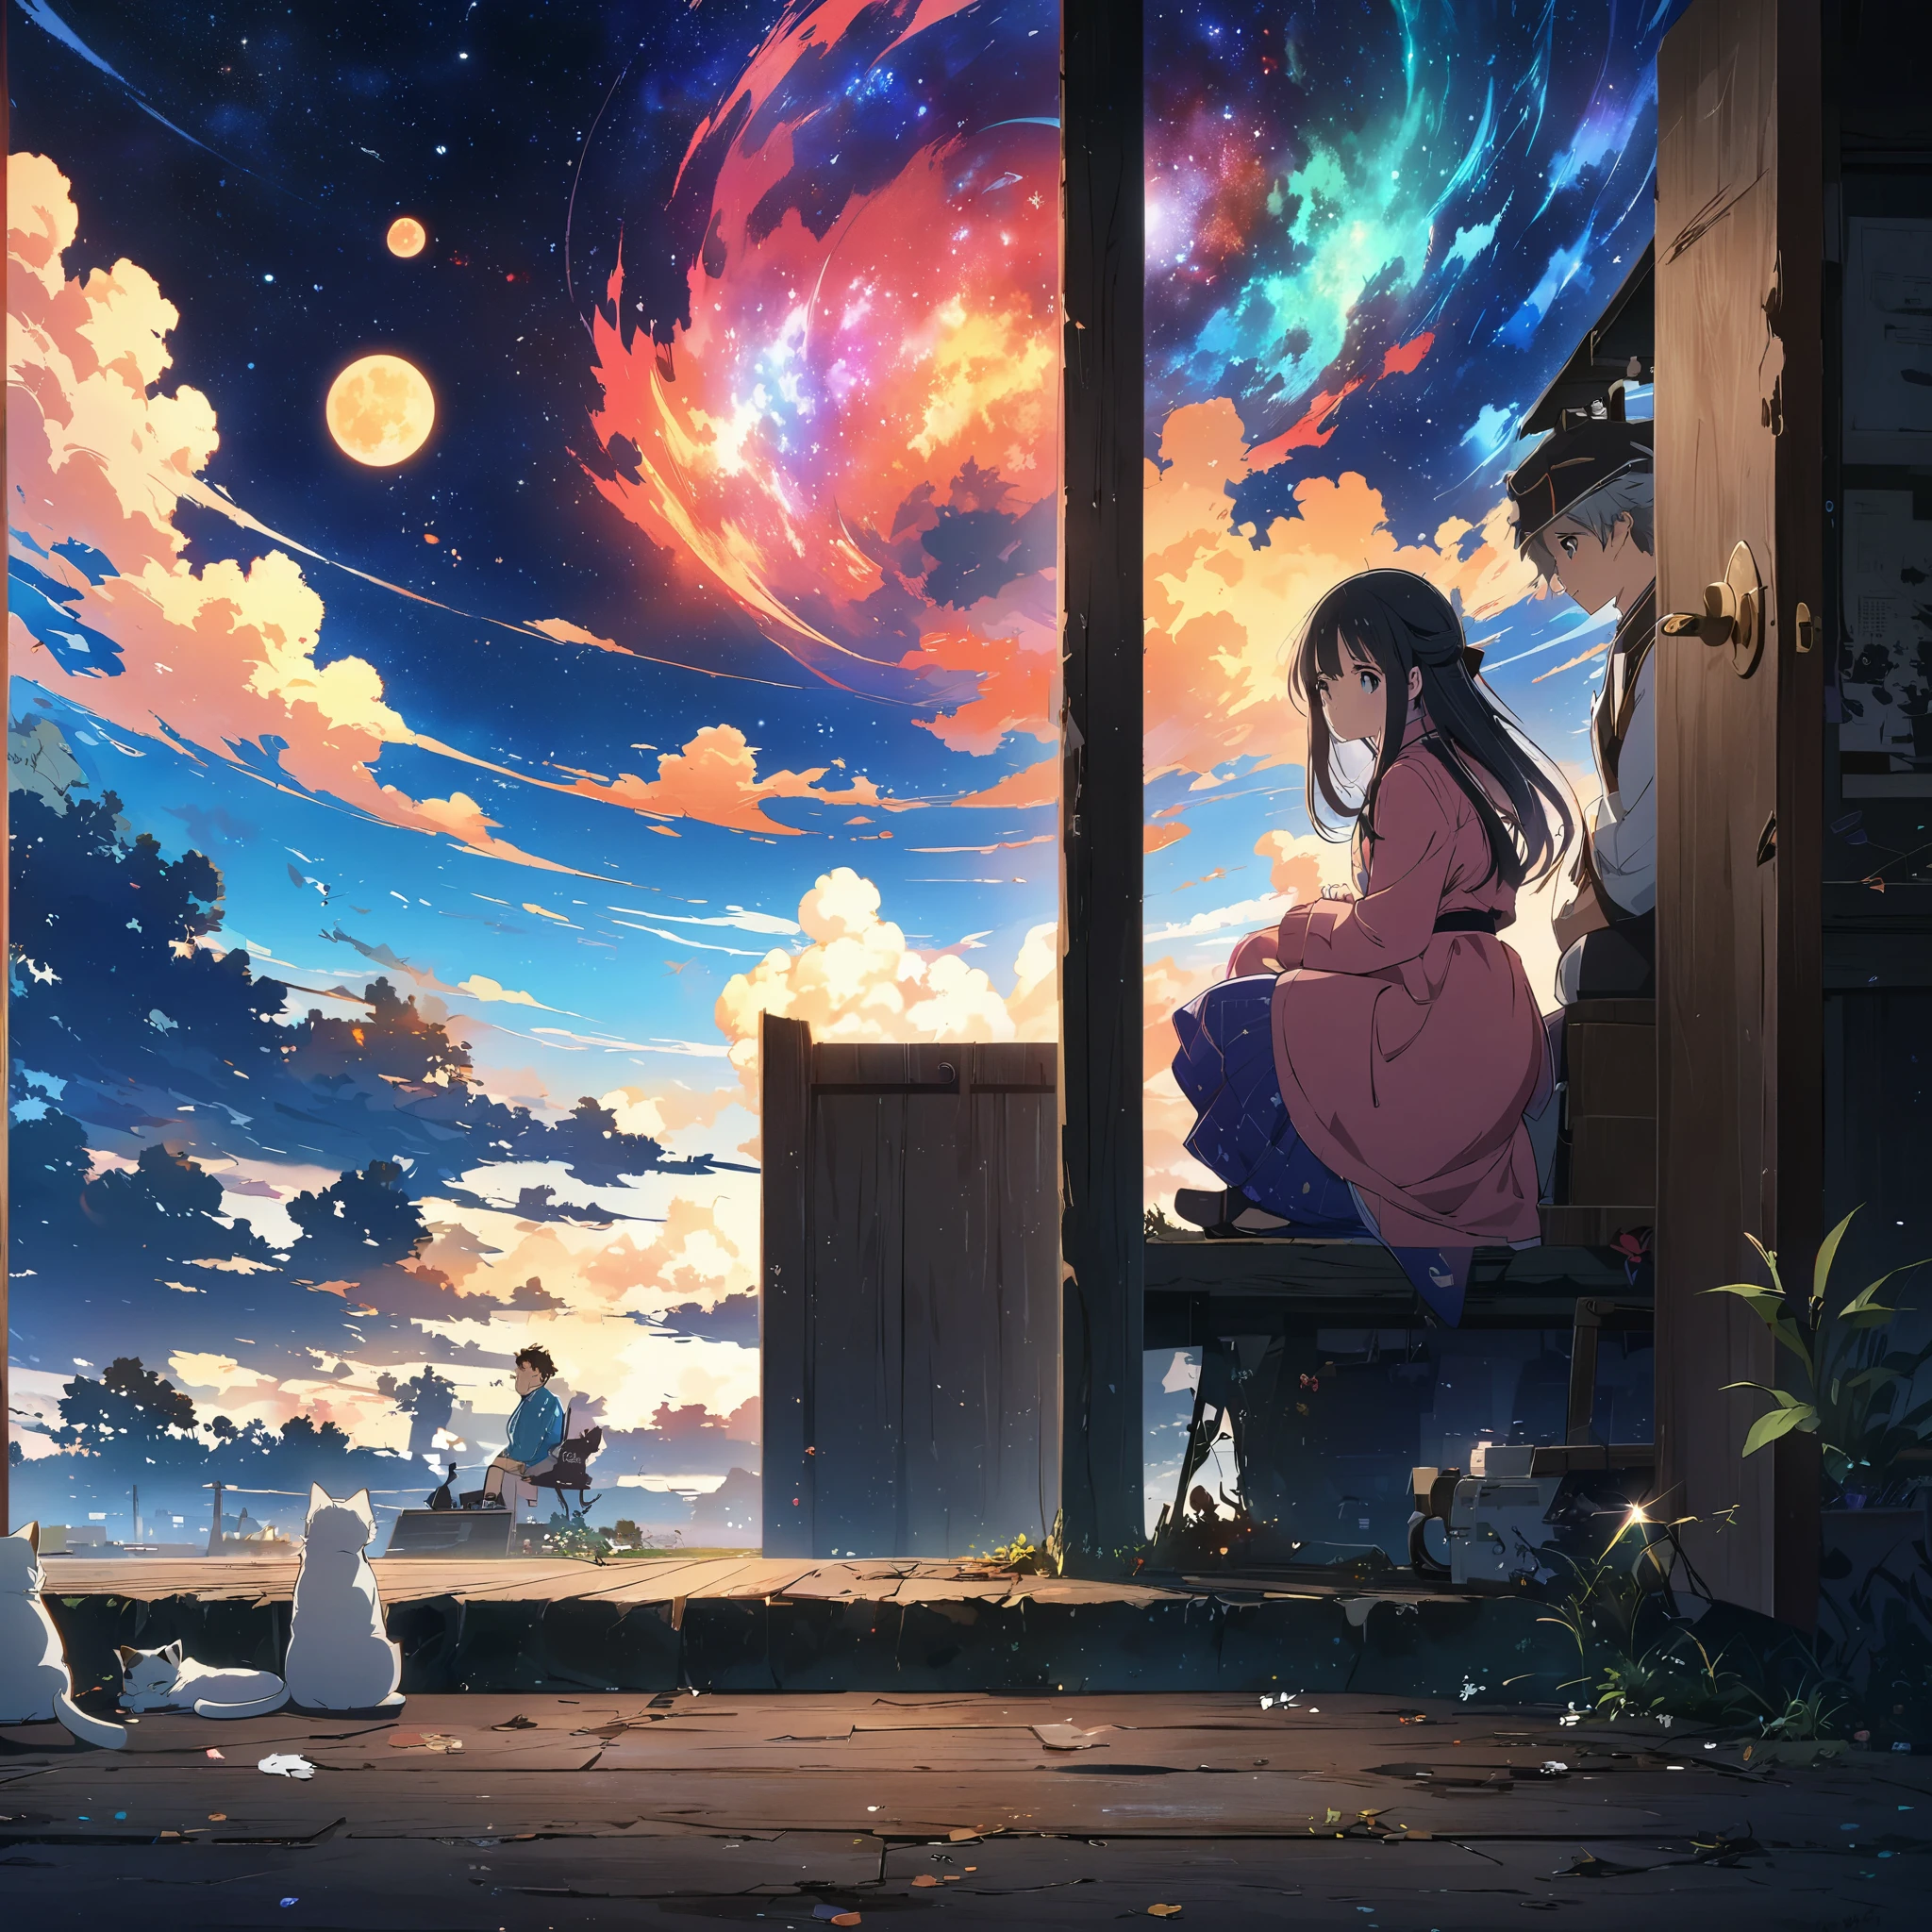 Anime drawings inspired by Makoto Shinkai, Sparrow&#39;s Door Lock, rotting wooden door, Topics on pixiv, Space Art, Makoto Shinkai Cyril Roland, Anime Japanese man and woman sitting and looking at the sky, Around the two of them, a white cat girl, a black cat girl, and a three-haired cat girl are running around in the sky., 4k anime wallpaper,anime art wallpaper 8k, Anime Art Wallpaper 16k, anime art wallpaper 32k, Daijin, Daijin, White cat, Black cat, Three-haired cat